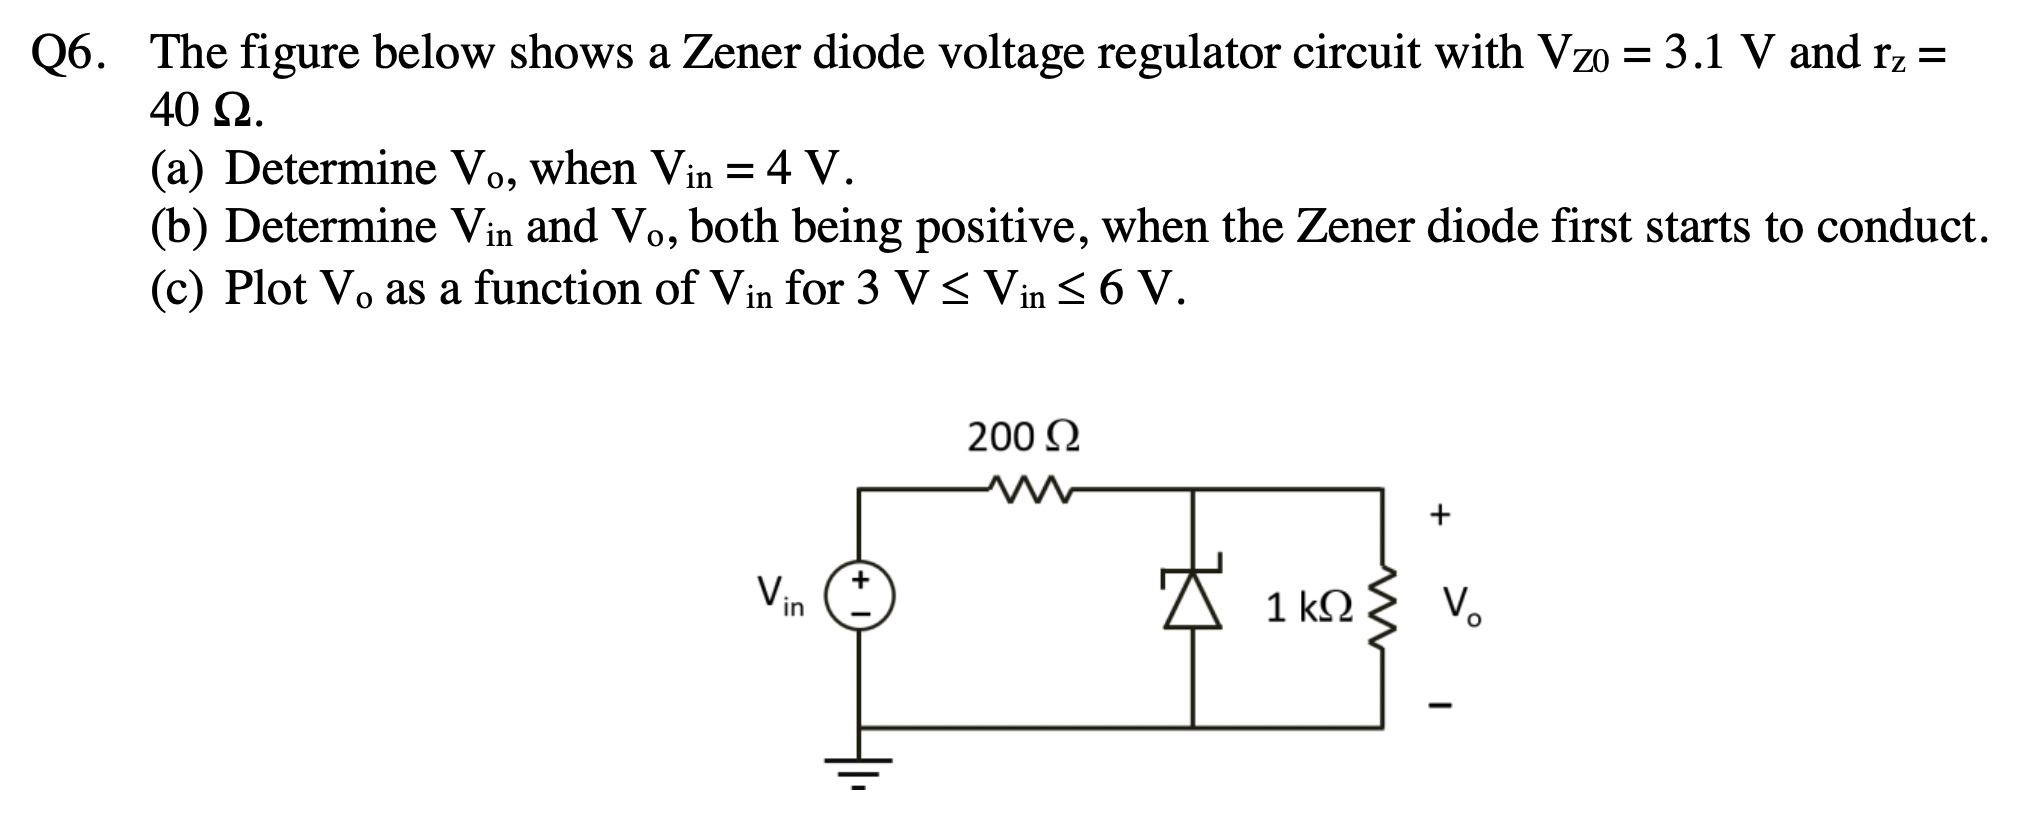 The figure below shows a Zener diode voltage regulator circuit with VZ0​=3.1 V and rz​= 40Ω. (a) Determine Vo​, when Vin ​=4 V. (b) Determine Vin ​ and Vo​, both being positive, when the Zener diode first starts to conduct. (c) Plot Vo​ as a function of Vin ​ for 3V≤Vin ​≤6V.